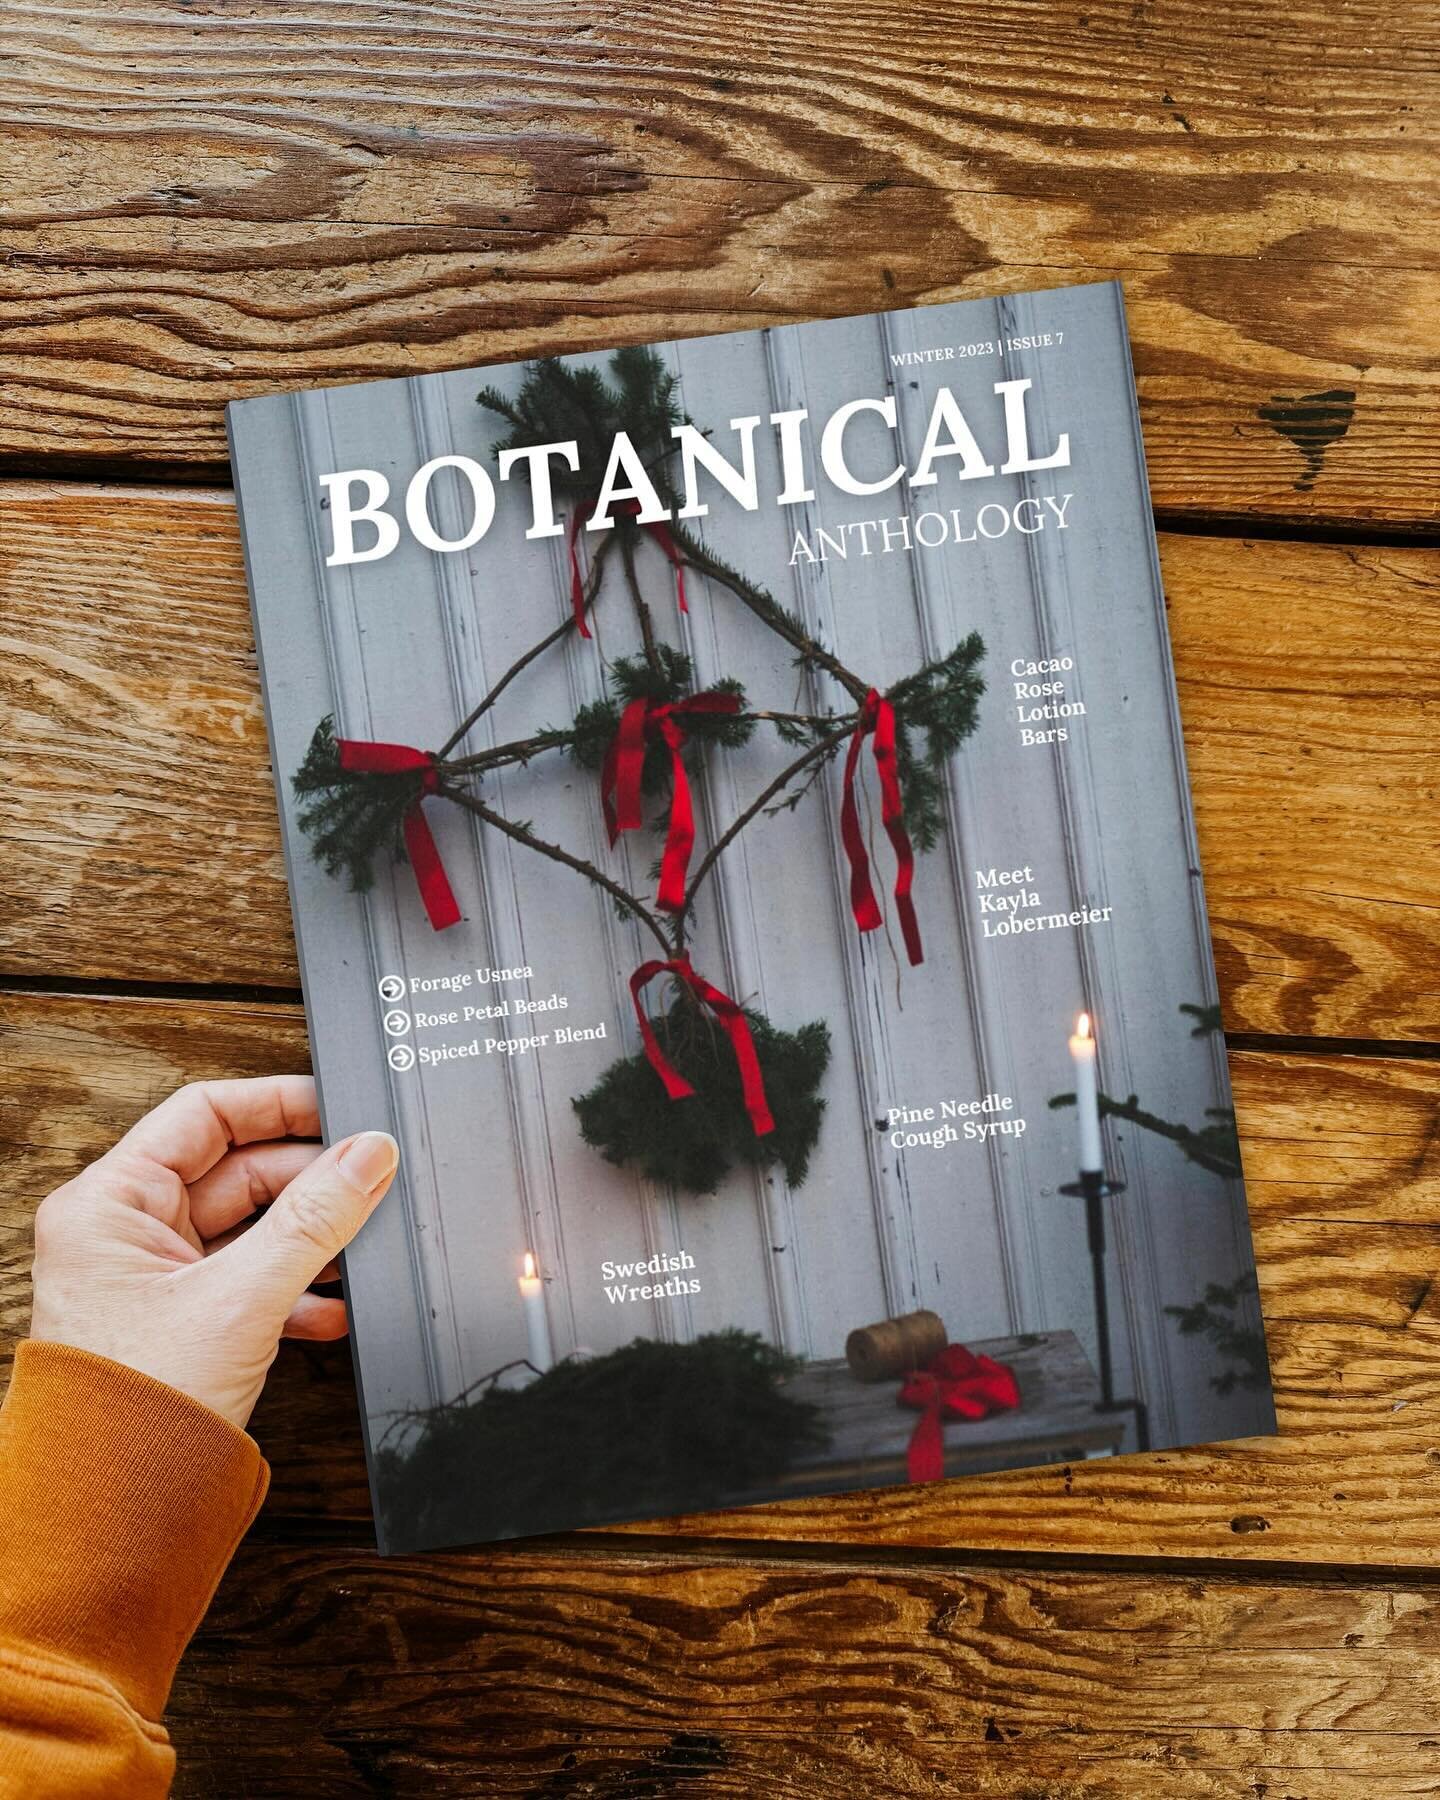 I&rsquo;m in a magazine! Today is the launch of the winter edition of Botanical Anthology &mdash; a seasonal, plant centered publication with over 50 articles to bring herbs to your apothecary, kitchen, crafts, harvests and winter celebrations. 

I&r